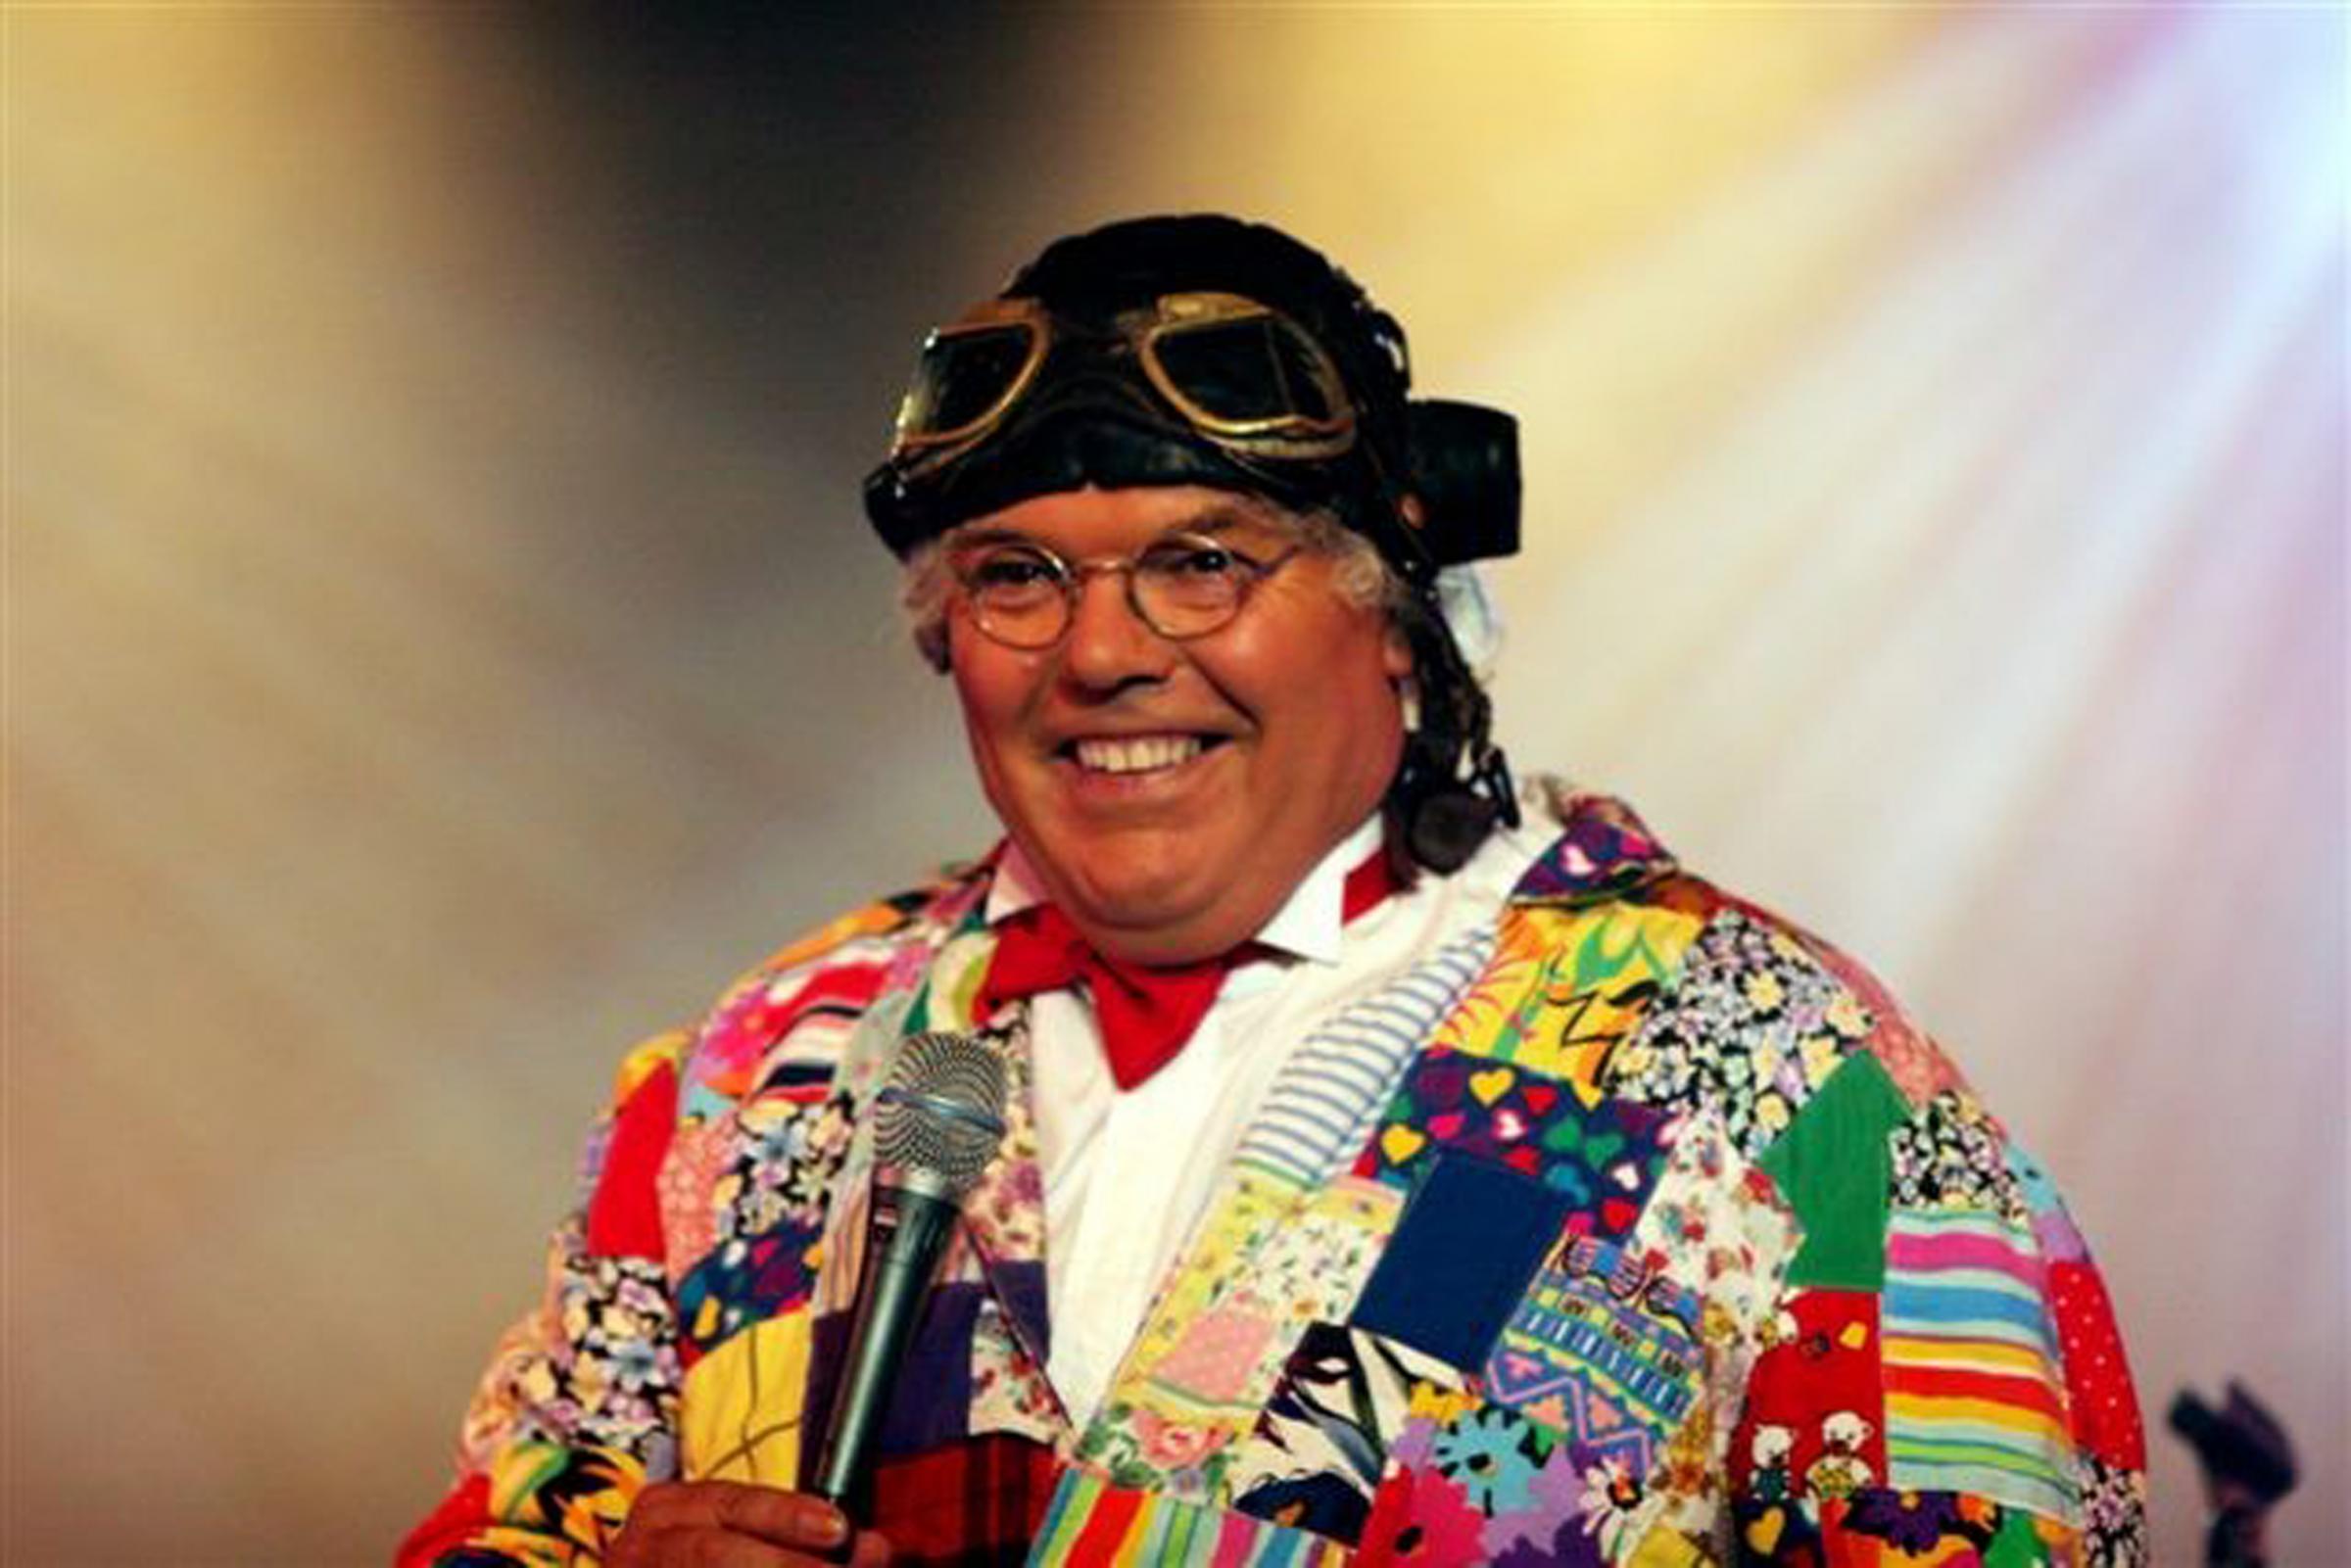 Roy chubby brown costume